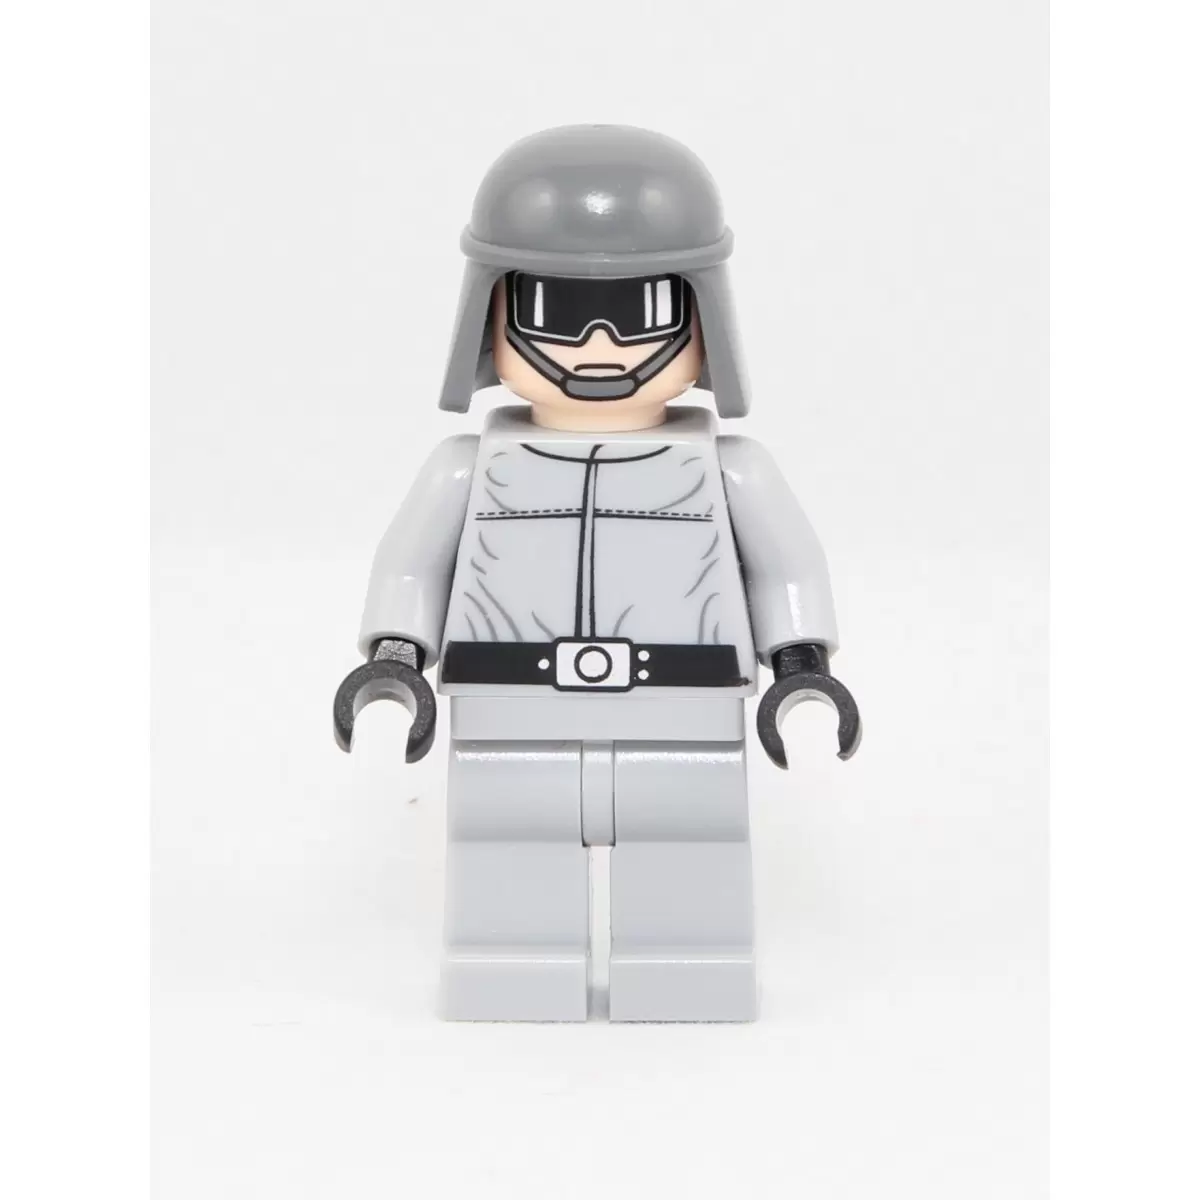 LEGO Star Wars Minifigs - Imperial AT-ST Pilot